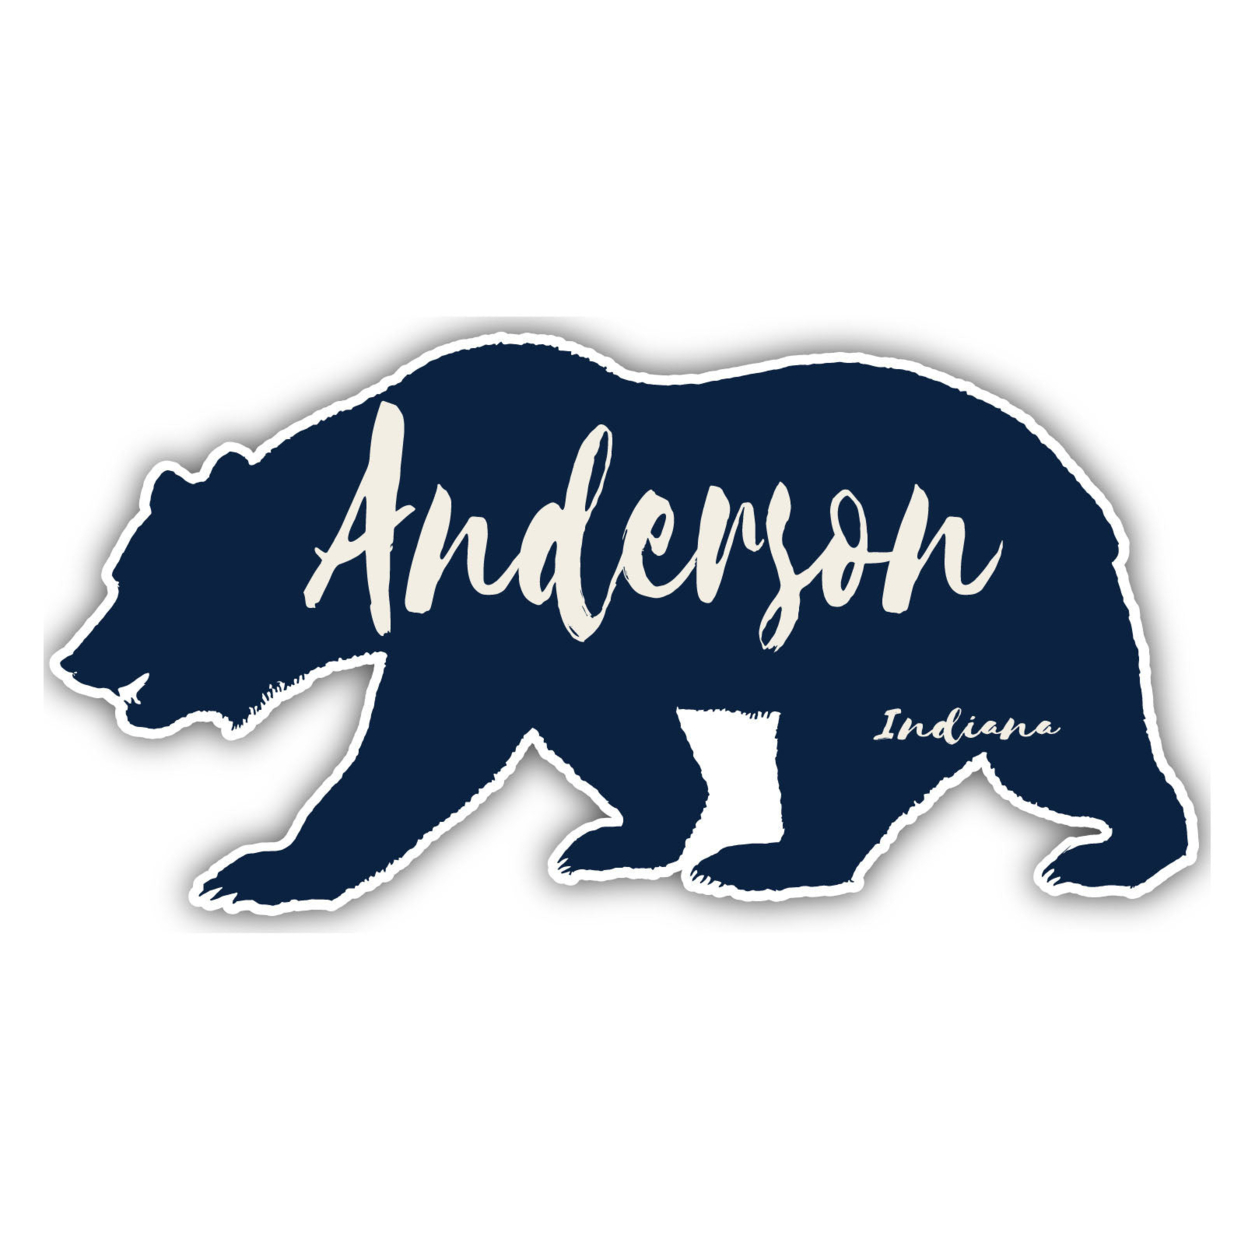 Anderson Indiana Souvenir Decorative Stickers (Choose Theme And Size) - 4-Pack, 6-Inch, Bear